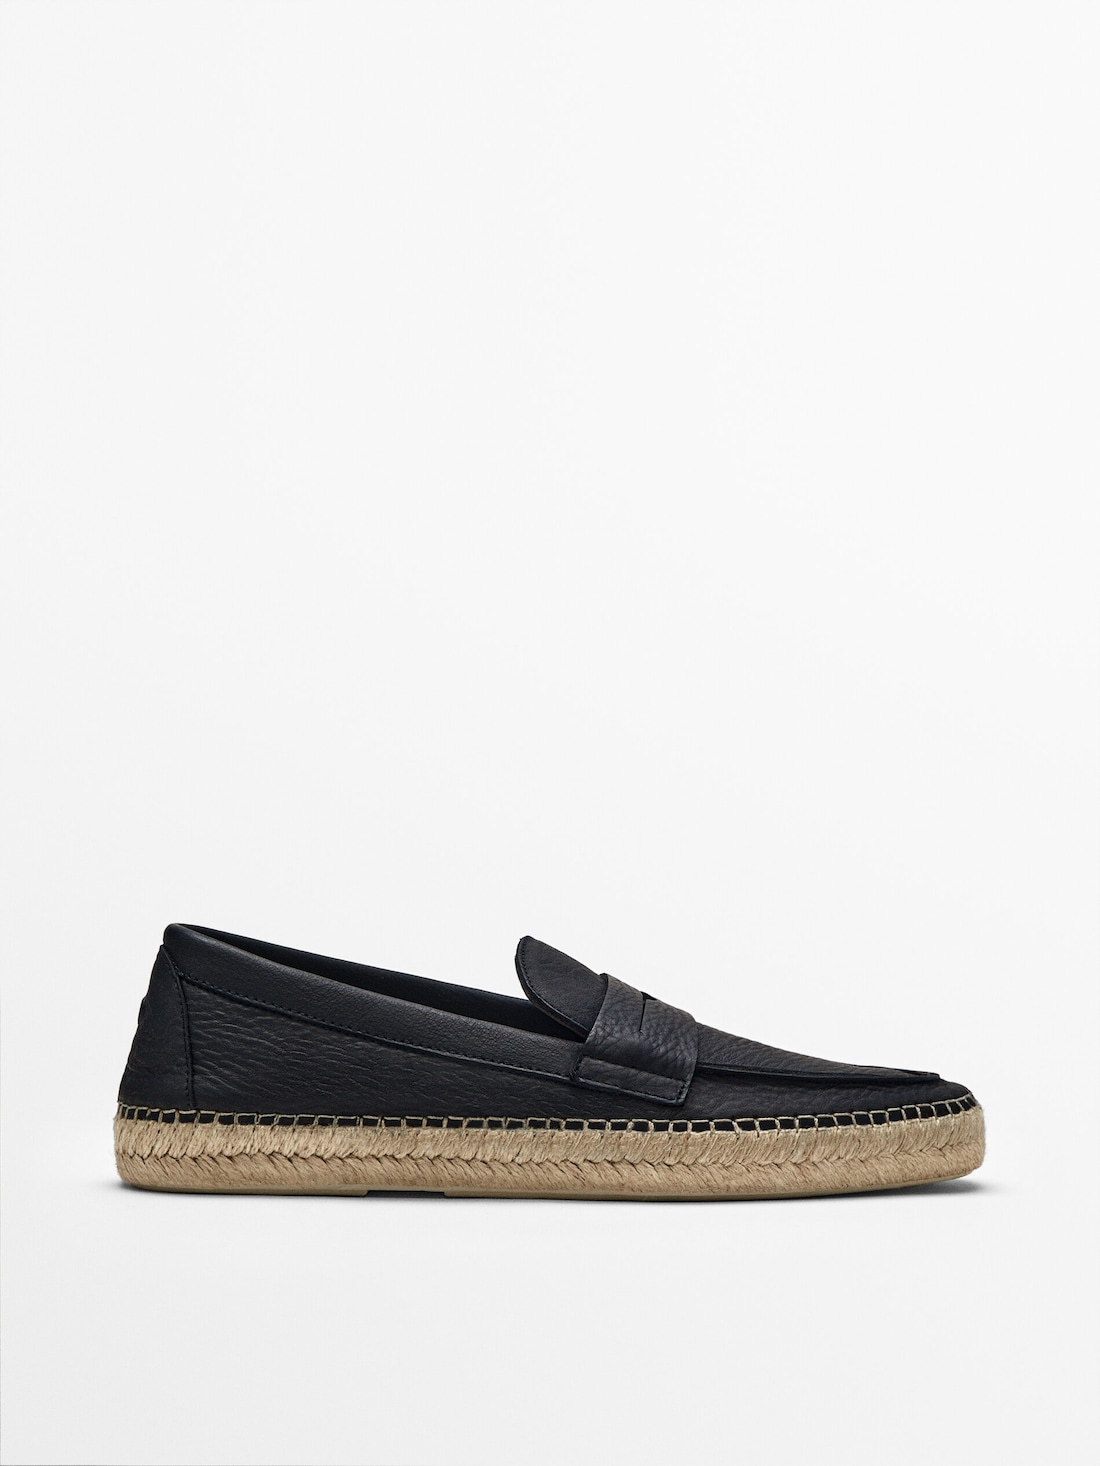 LEATHER ESPADRILLES LIMITED EDITION